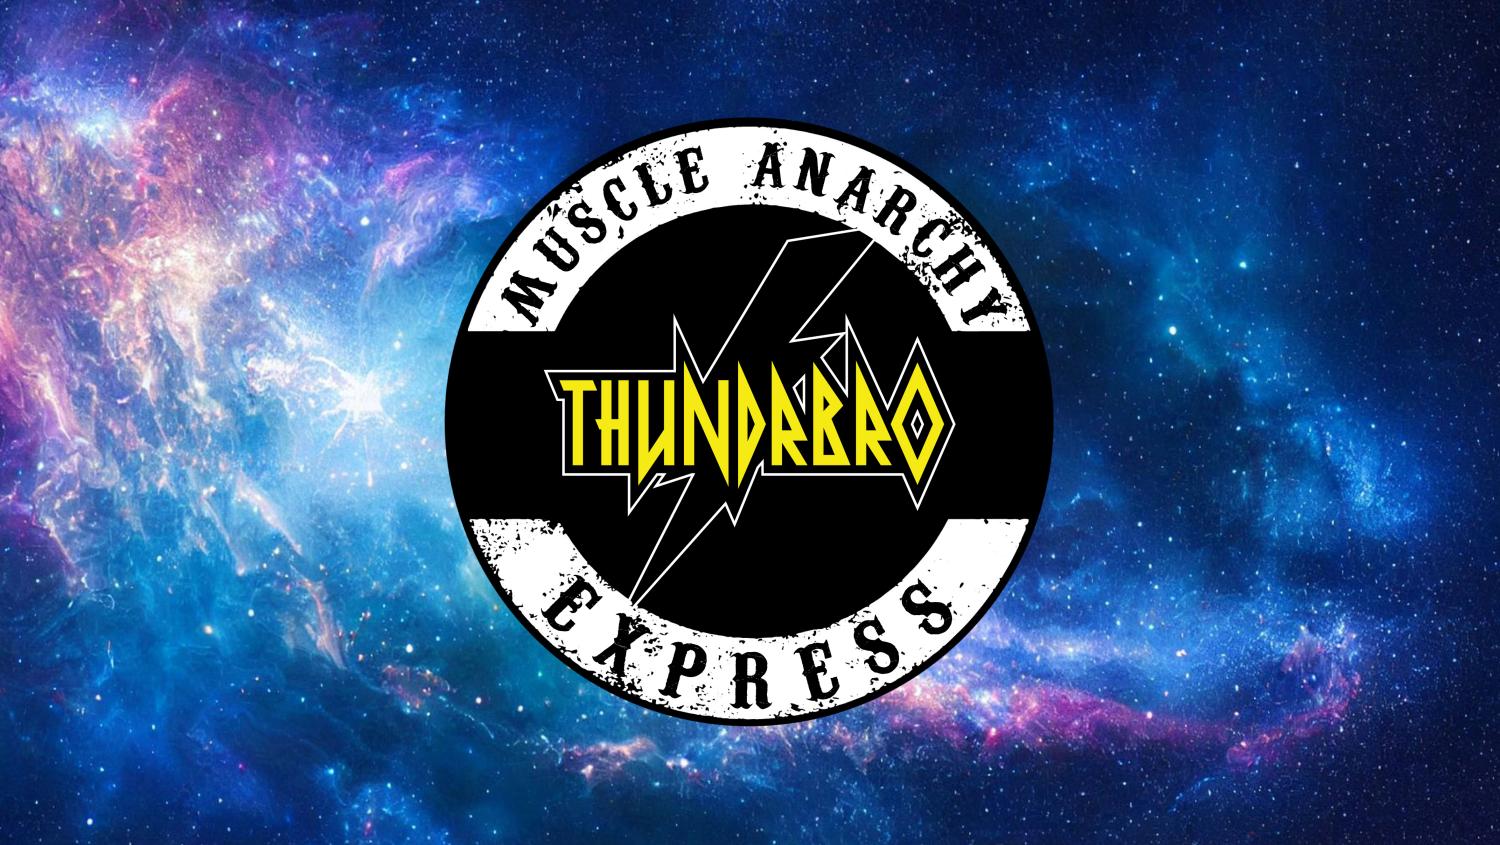 Muscle Anarchy Express (40 min)